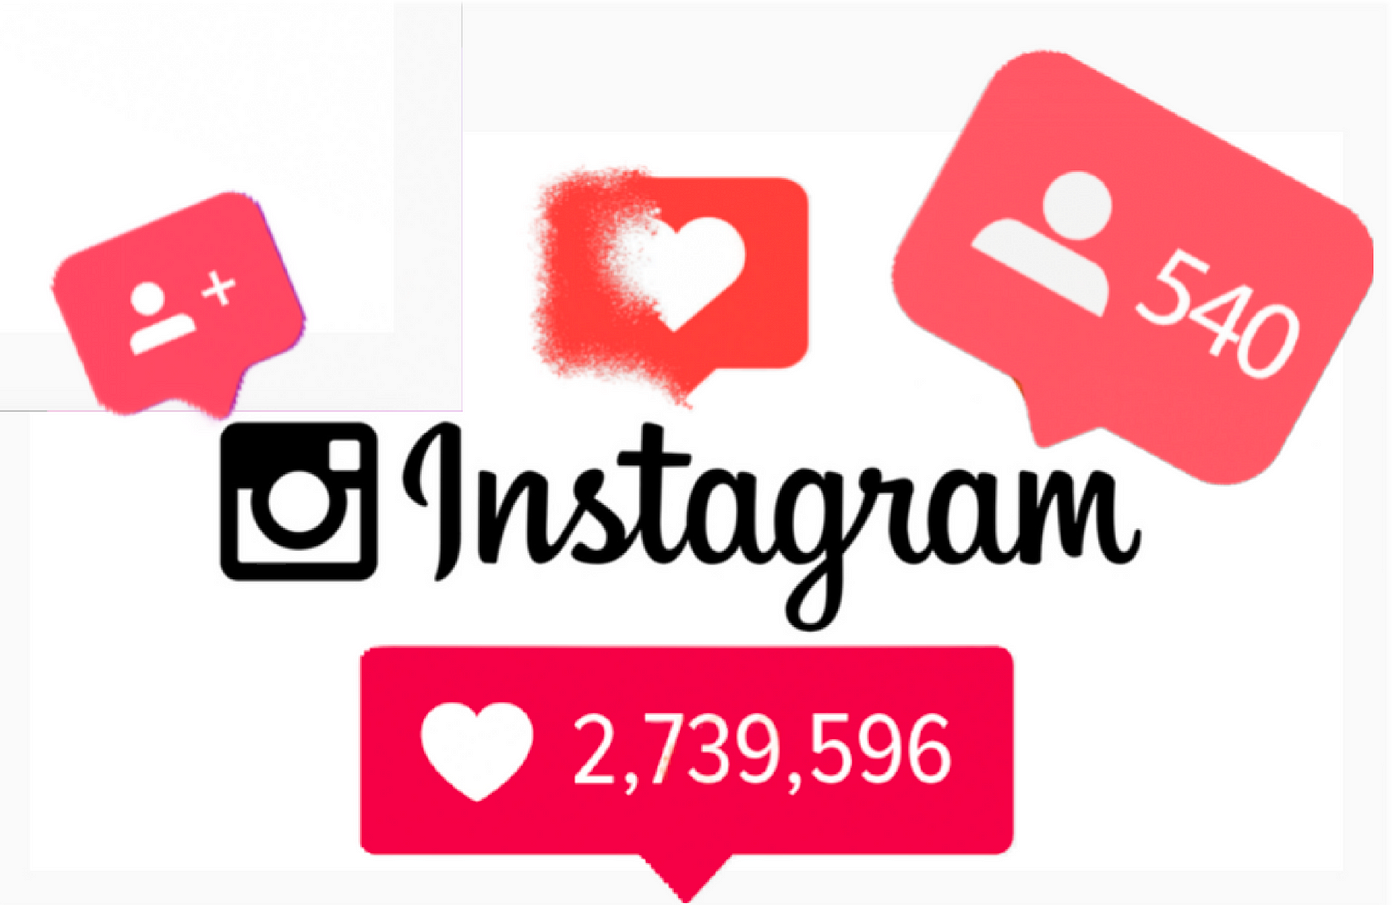 23 Ways To Get More Followers On Instagram [Updated For 2022]